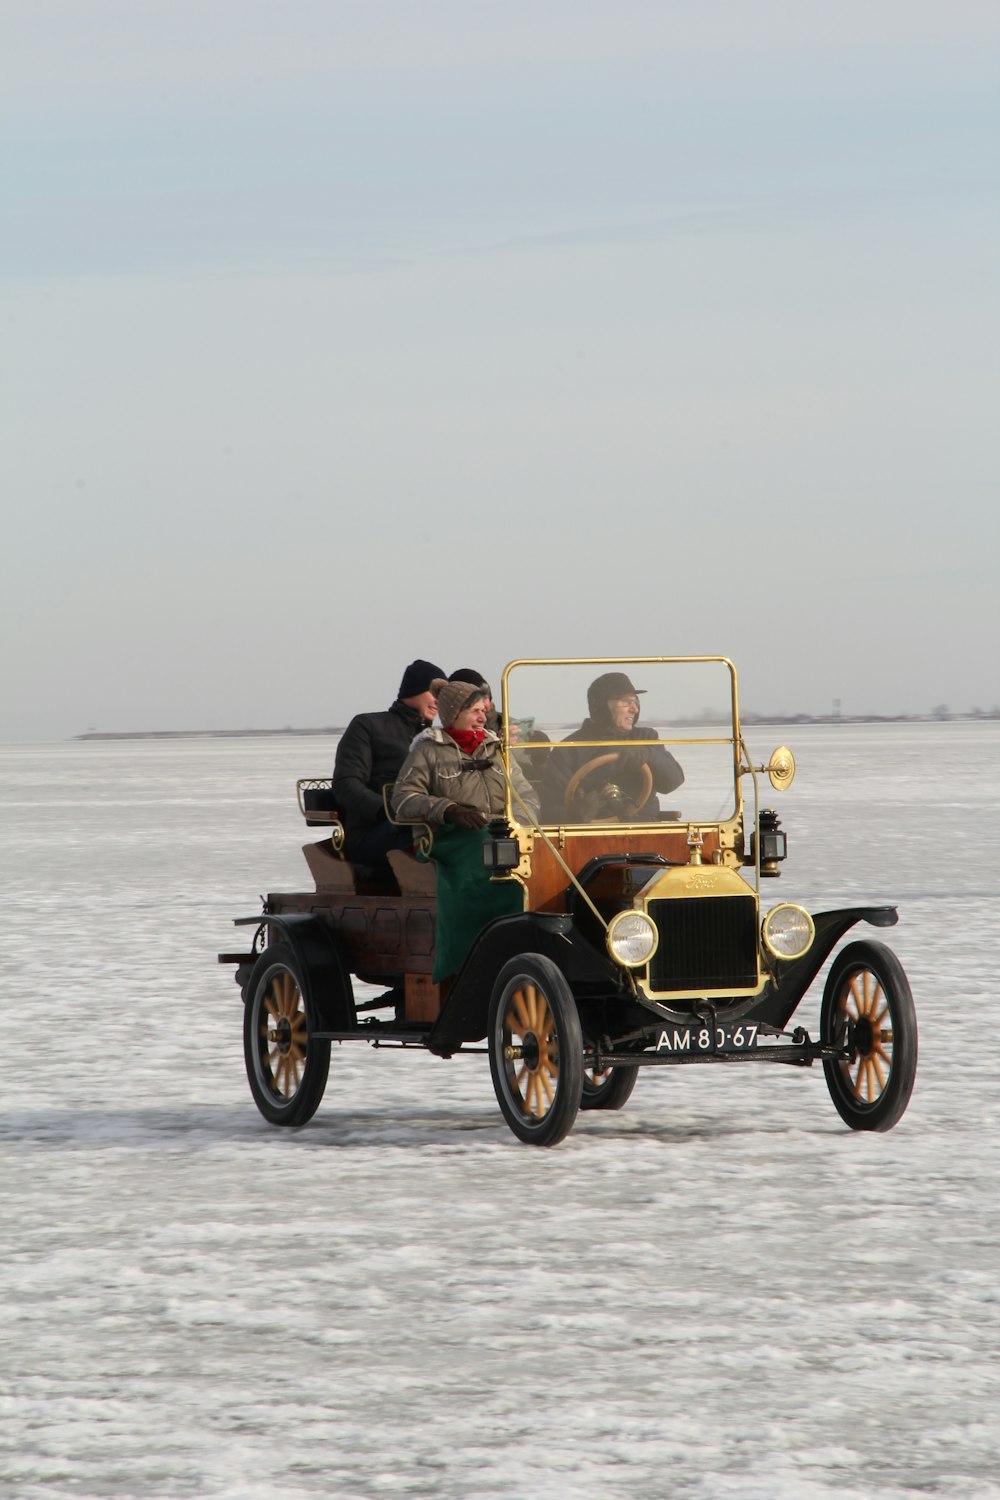 couple riding on green and brown car on sea during daytime